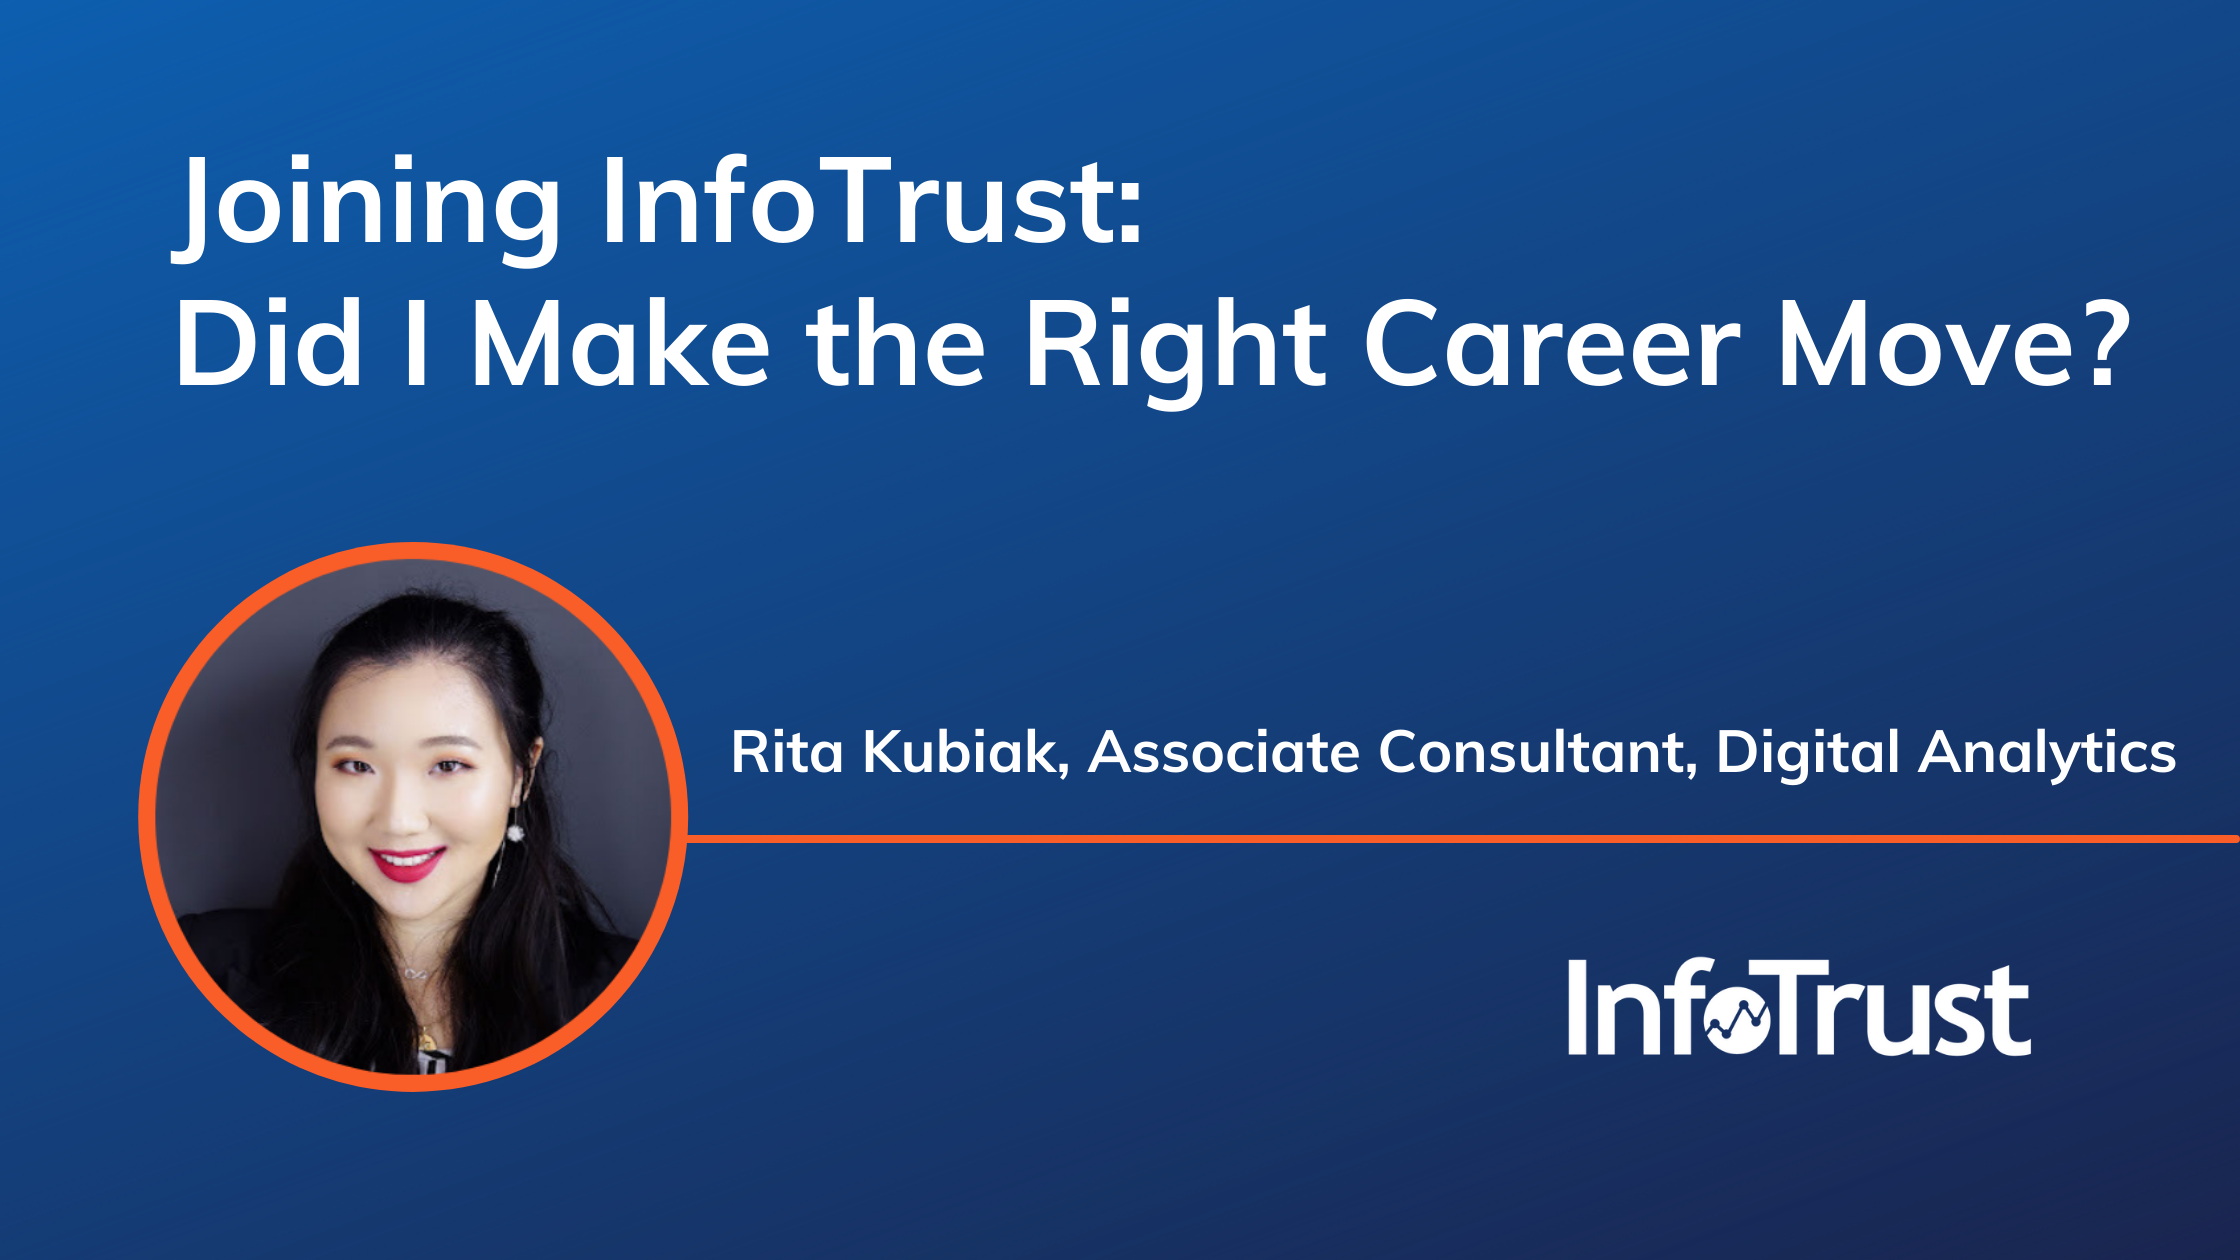 Joining InfoTrust: Did I Make the Right Career Move?